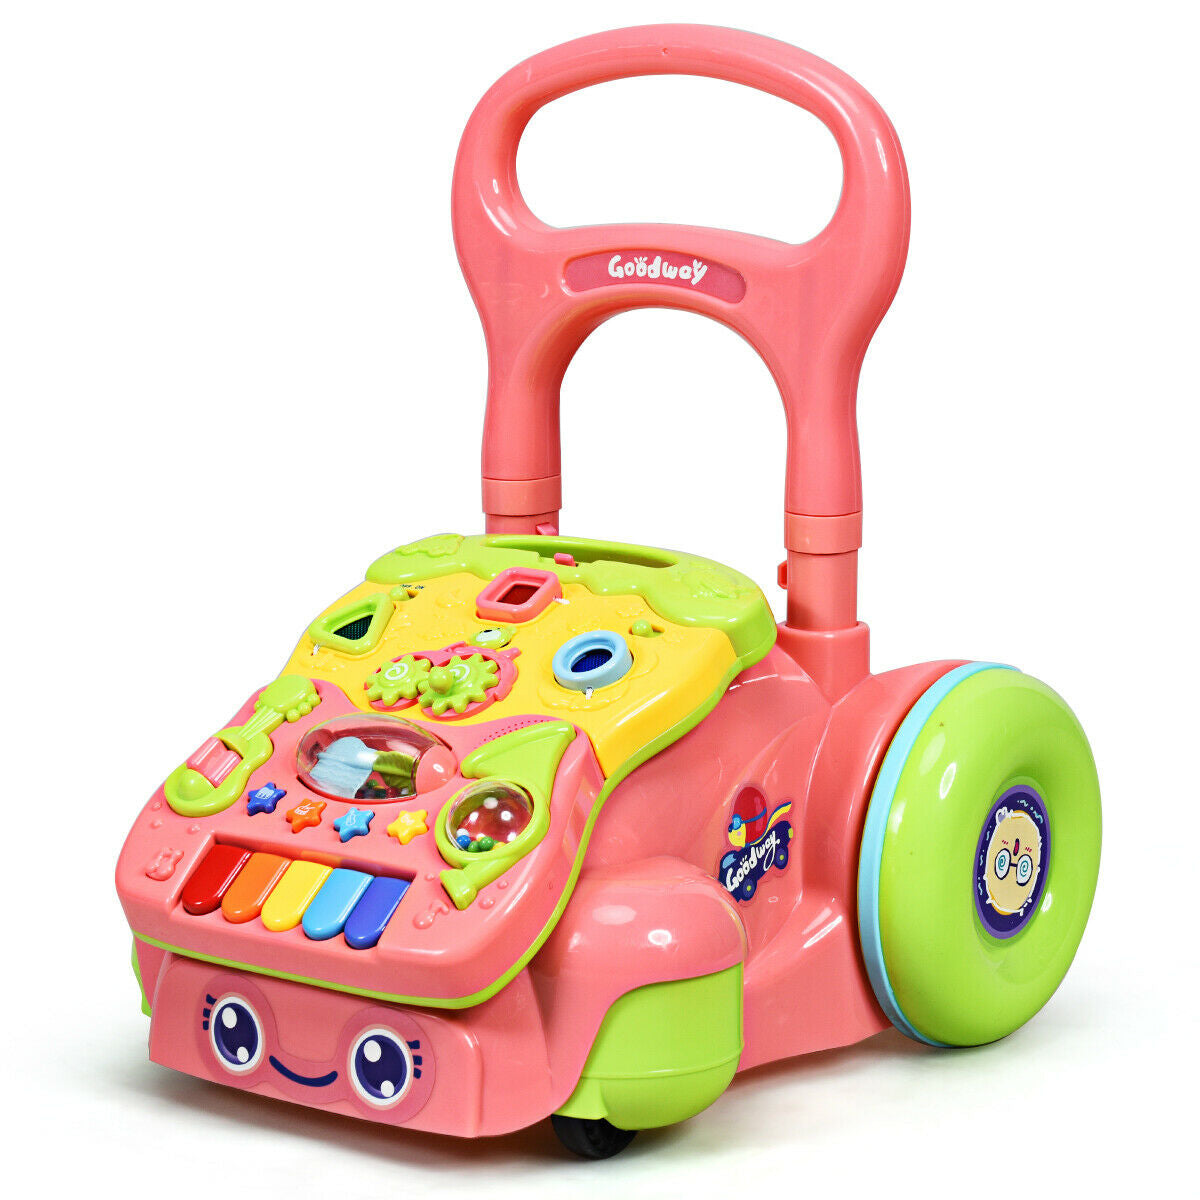 Hikidspace Sit-to-Stand Learning Baby Walker for Early Development Toys